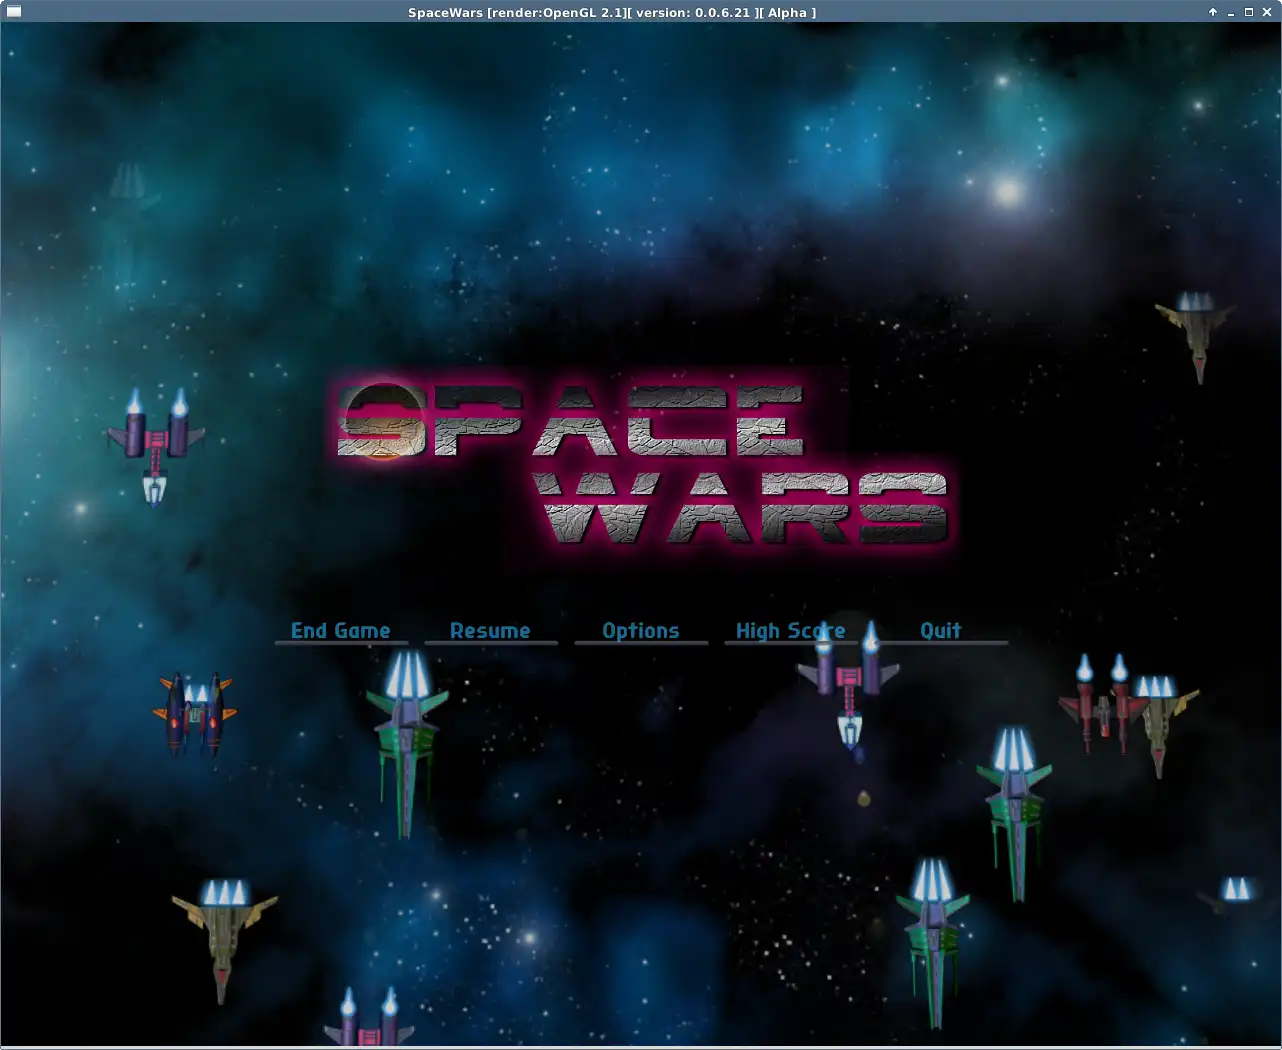 Download web tool or web app SHMUP - SpaceWars to run in Linux online